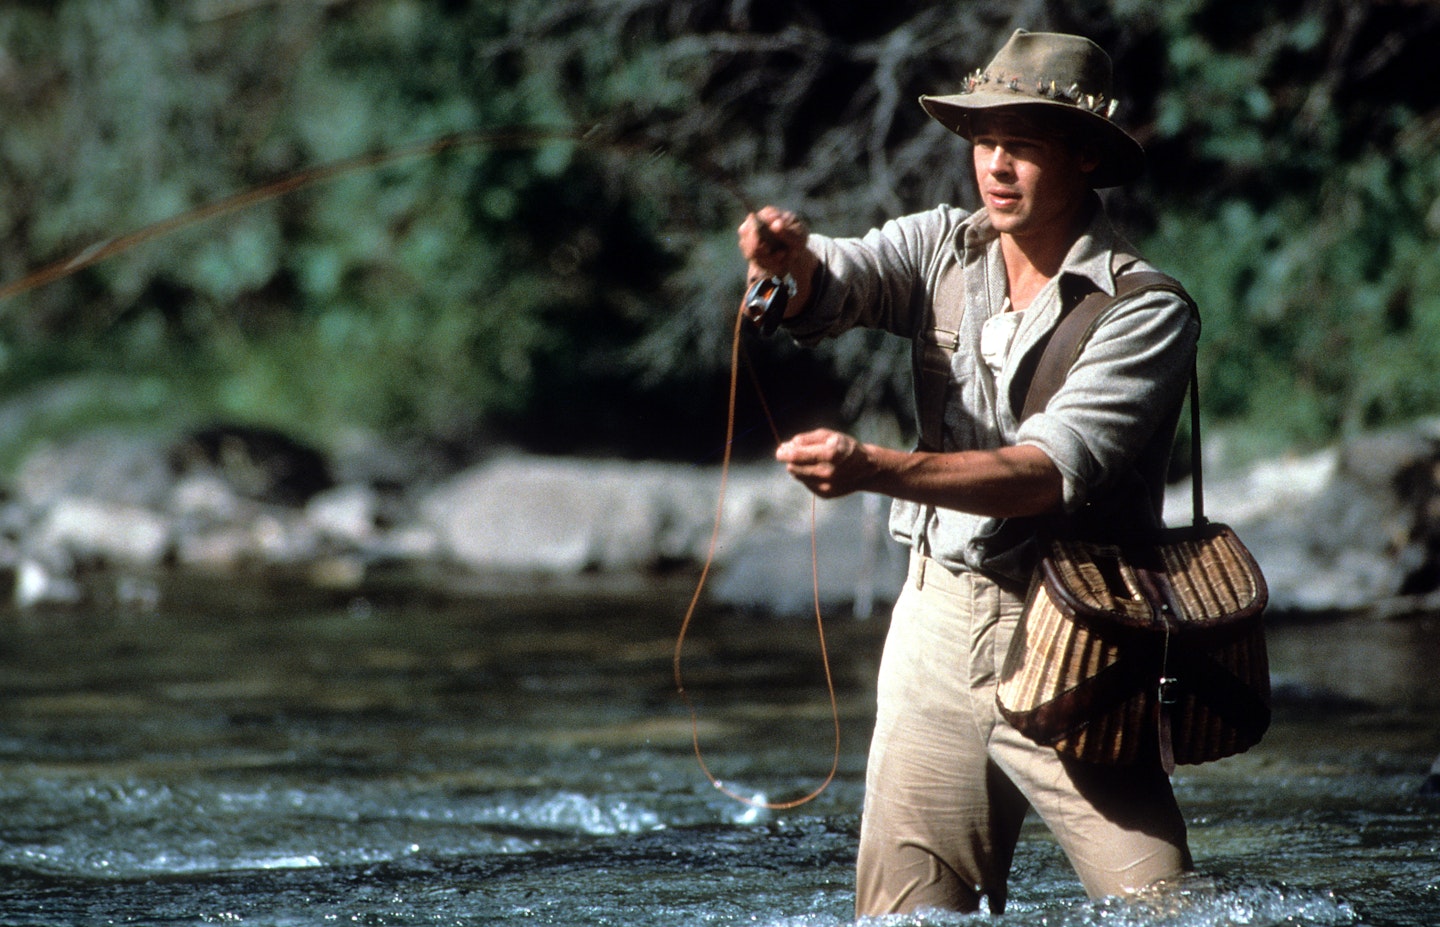 The 10 best fishing movies, Movies